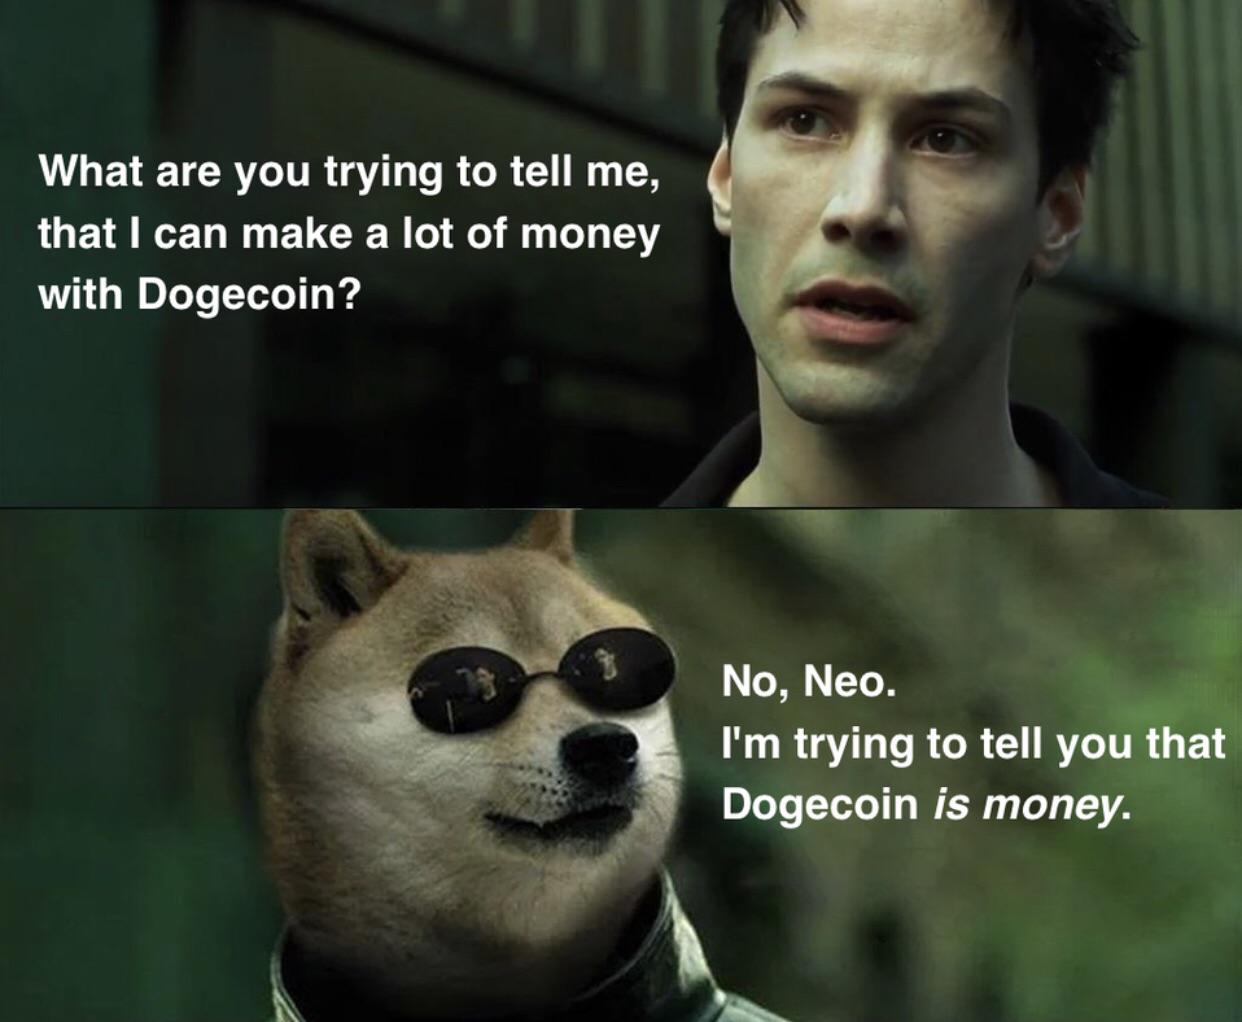 you trying to tell me - What are you trying to tell me, that I can make a lot of money with Dogecoin? No, Neo. I'm trying to tell you that Dogecoin is money.